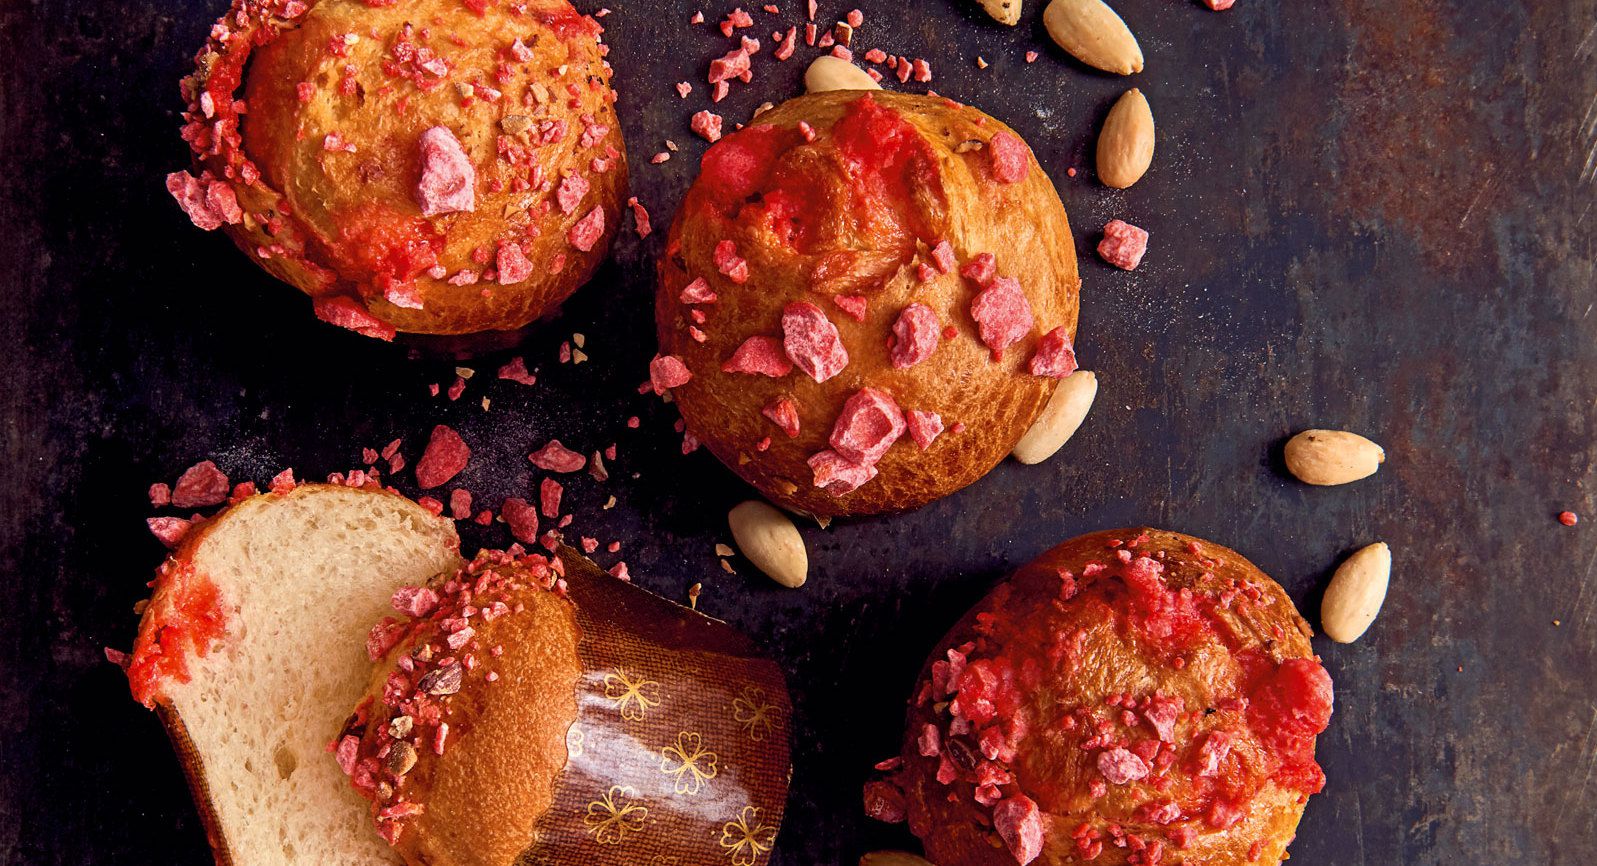 Chinois aux pralines roses, une brioche ultra moelleuse